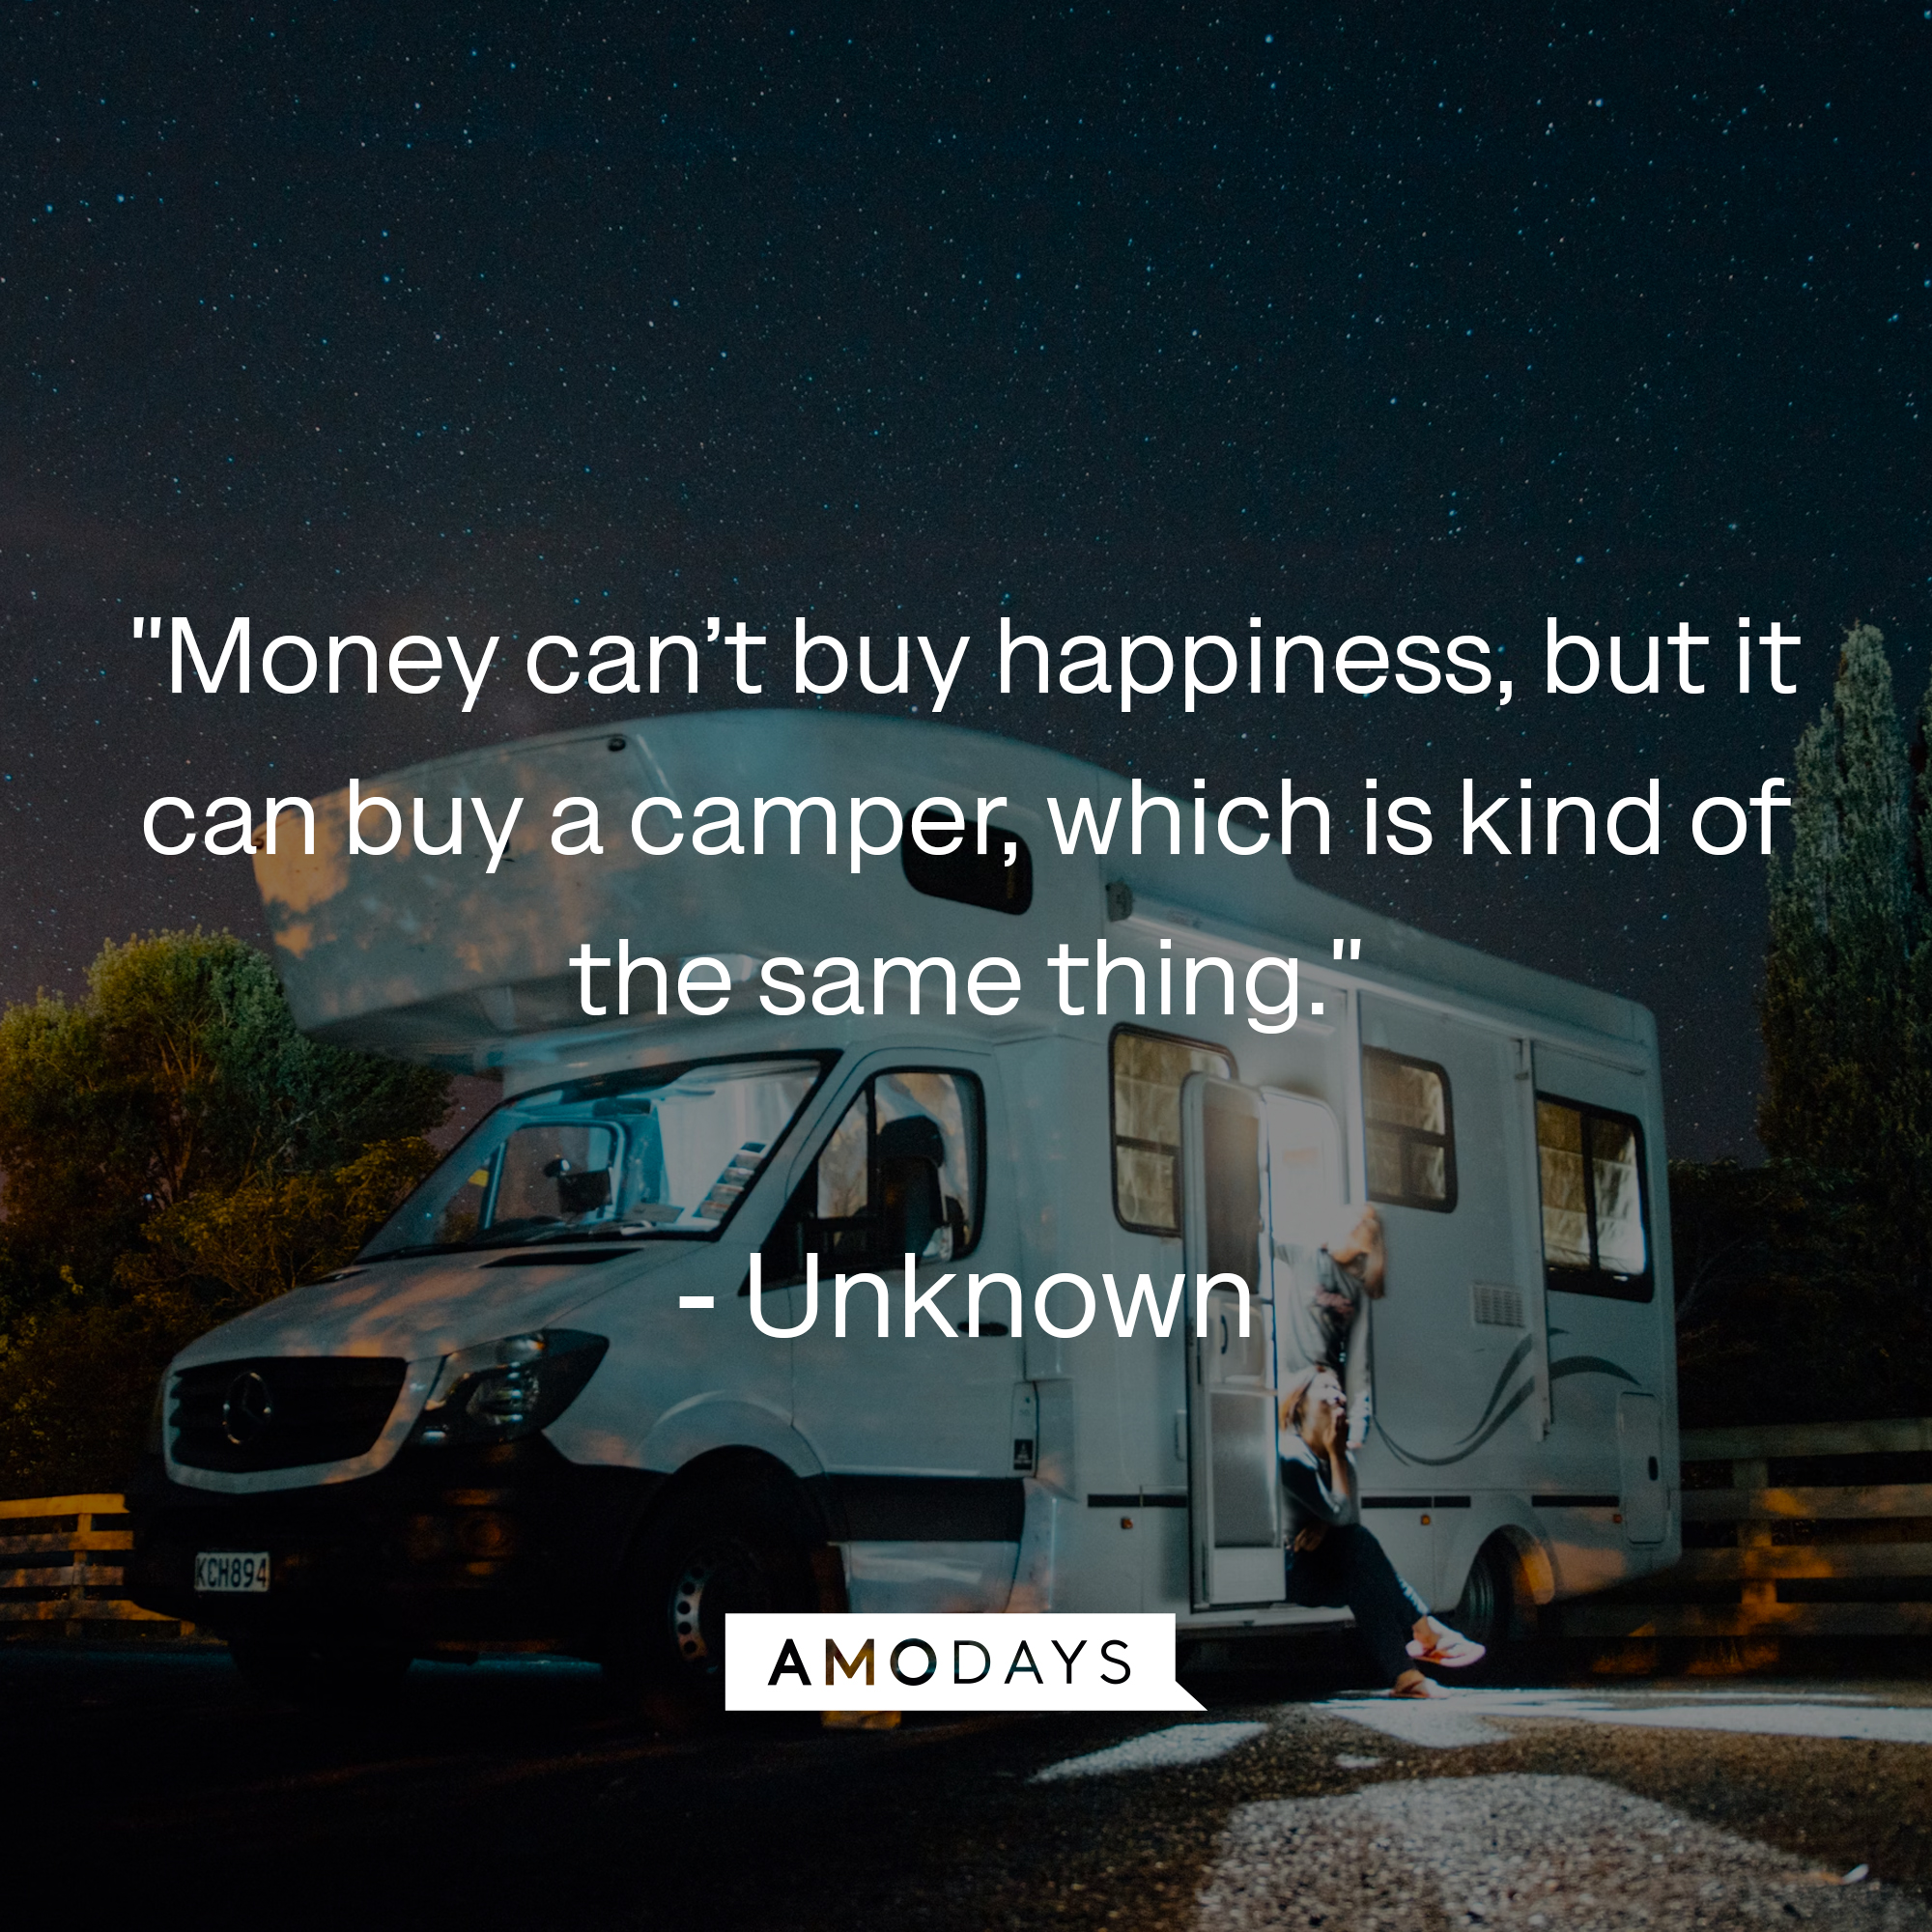 Unknown's quote: "Money can’t buy happiness, but it can buy a camper, which is kind of the same thing." Source: Countryliving